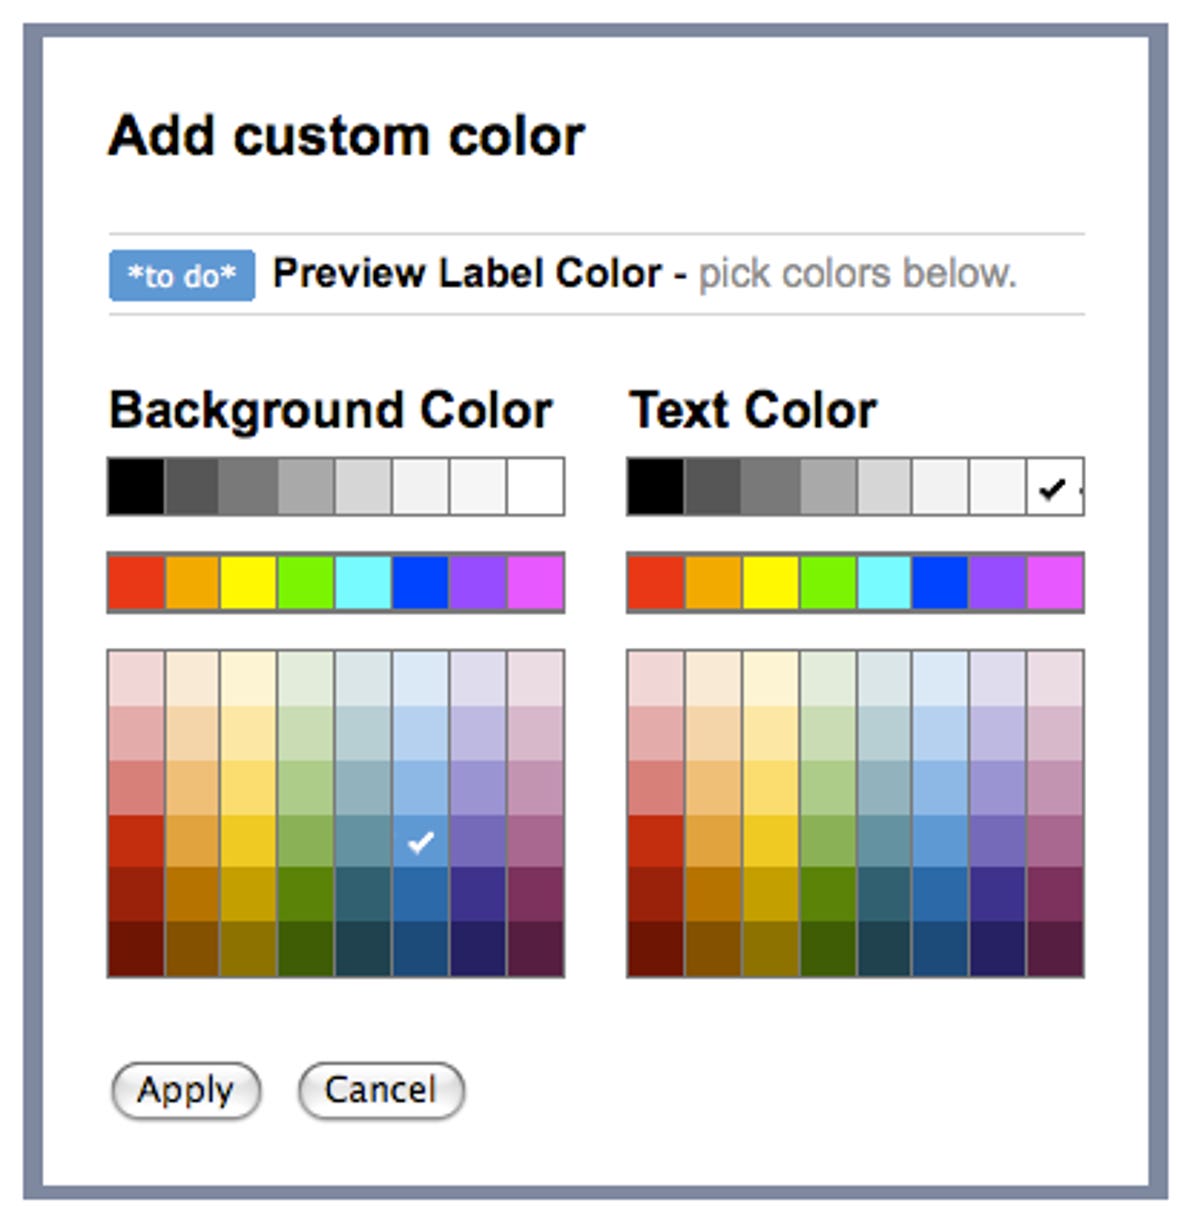 The ability to choose custom colors for Gmail labels is now a standard feature.